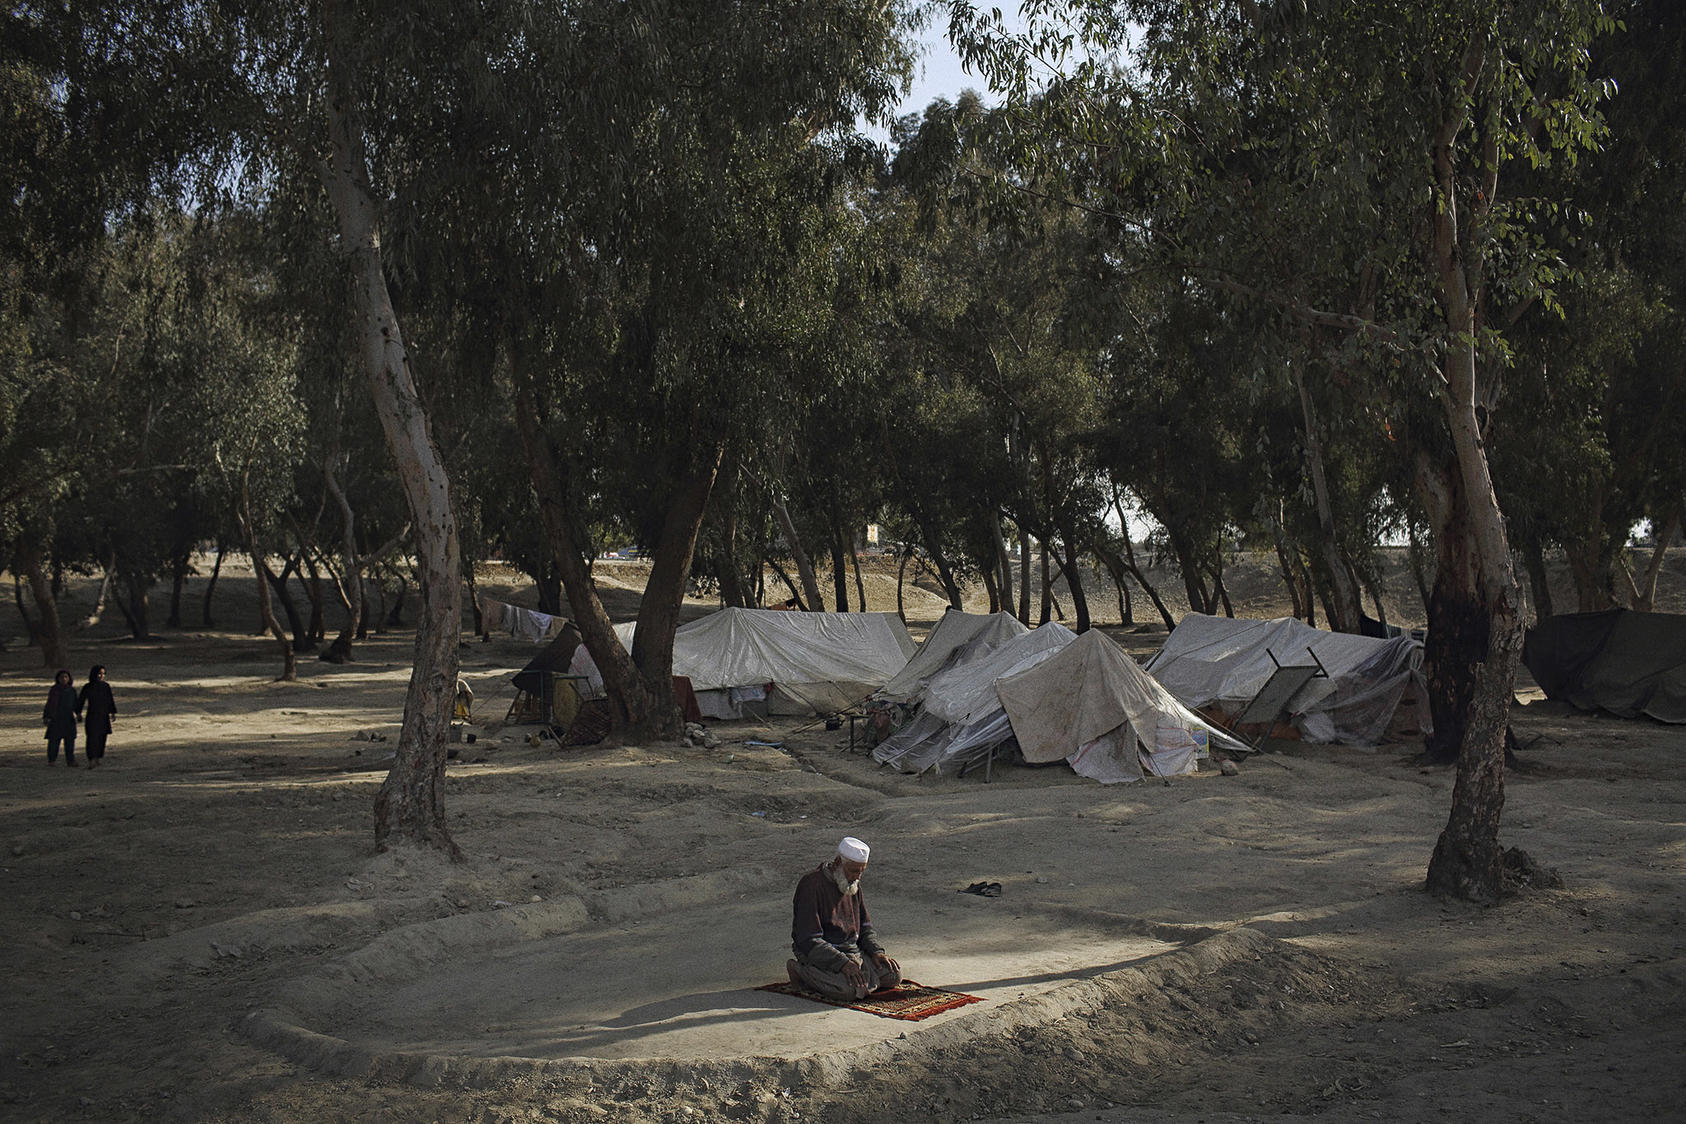 An Afghan man, Haji Hazrat, prays at a camp near Jalalabad in 2015 after he and other refugees in Pakistan were forced by authorities there to return to their homeland. (Andrew Quilty/The New York Times)